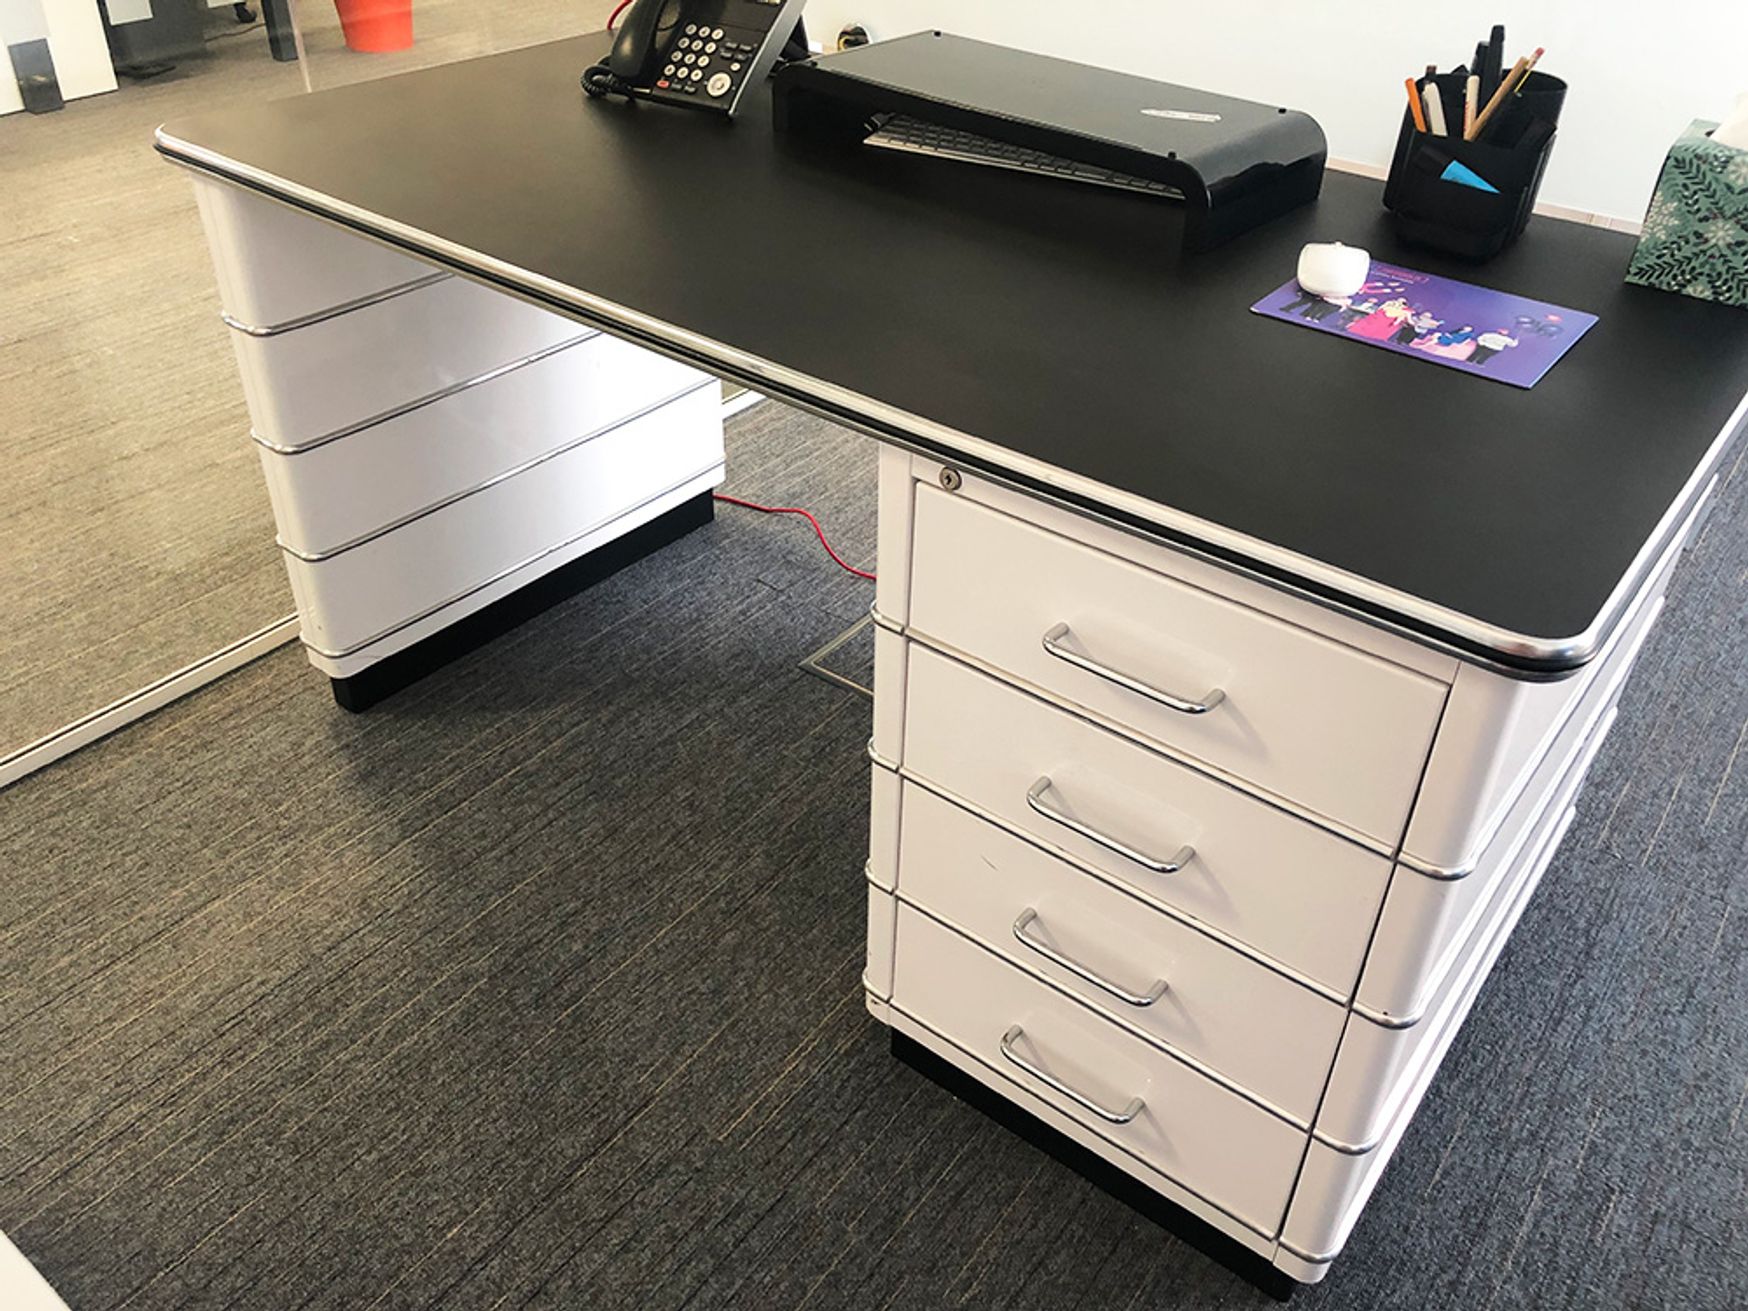 Used Muller Chrysler Desks with White Drawers and Black Tops